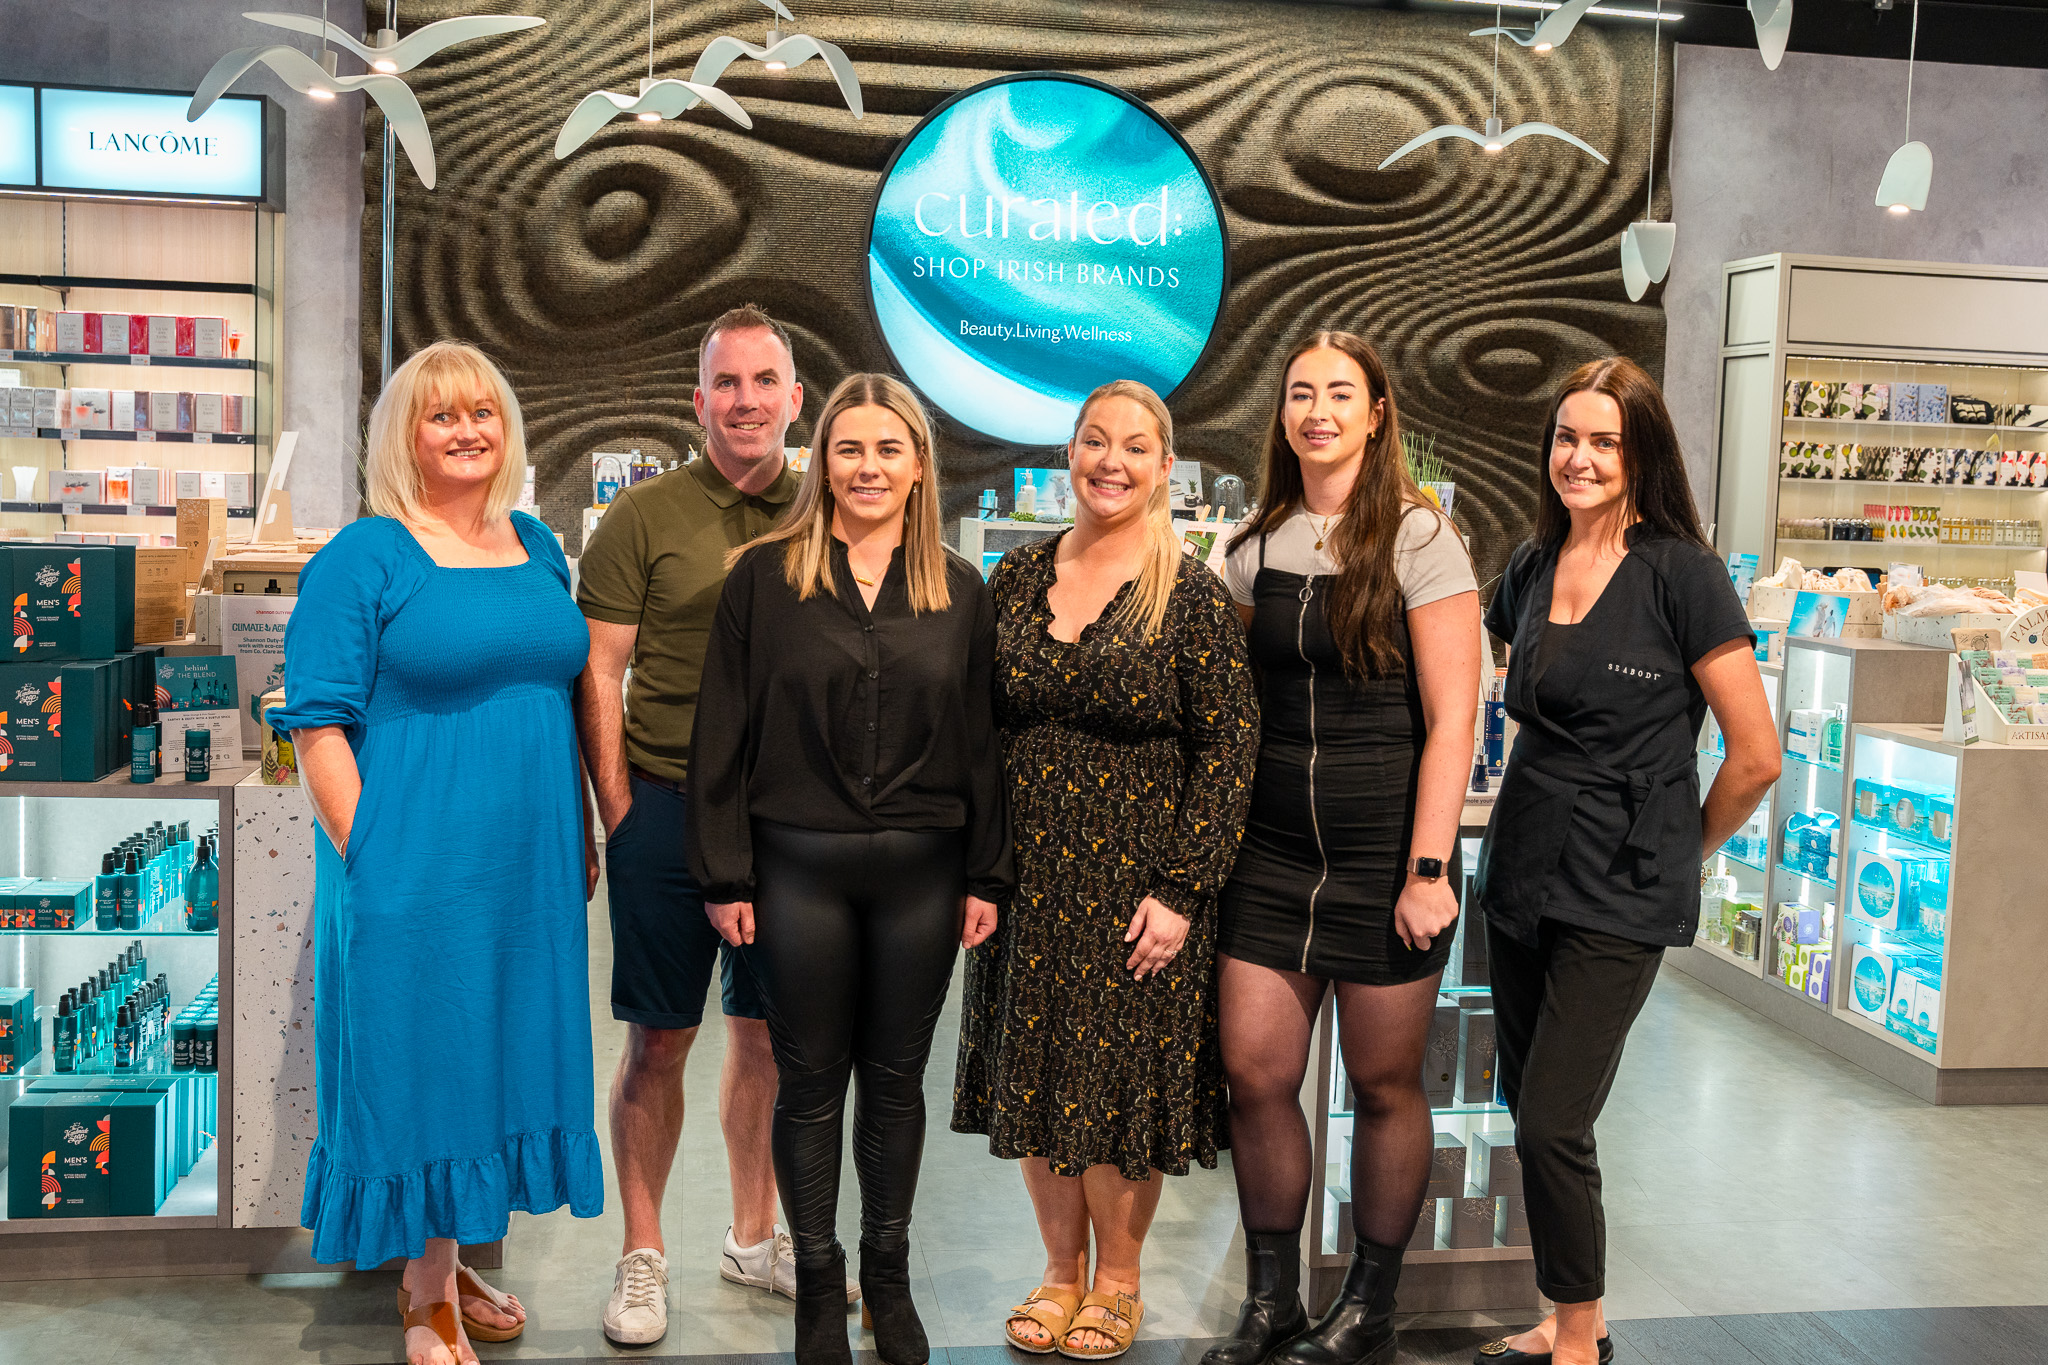 The sky’s the limit for local Irish brands in Shannon Duty Free’s new Beauty, Living and Wellness area called Curated. Pictured left to right is Yvonne Daly (Mervue), Evan Talty (Wild Irish Seaweed), Chantelle Keane, Danielle Kenneally and Aisling Kenneally (Wix & Wax Ireland) and Orla Kenny (Seabody),whose products are all featured in Duty Free's new Curated section. IMAGE NO REPRO FEE.